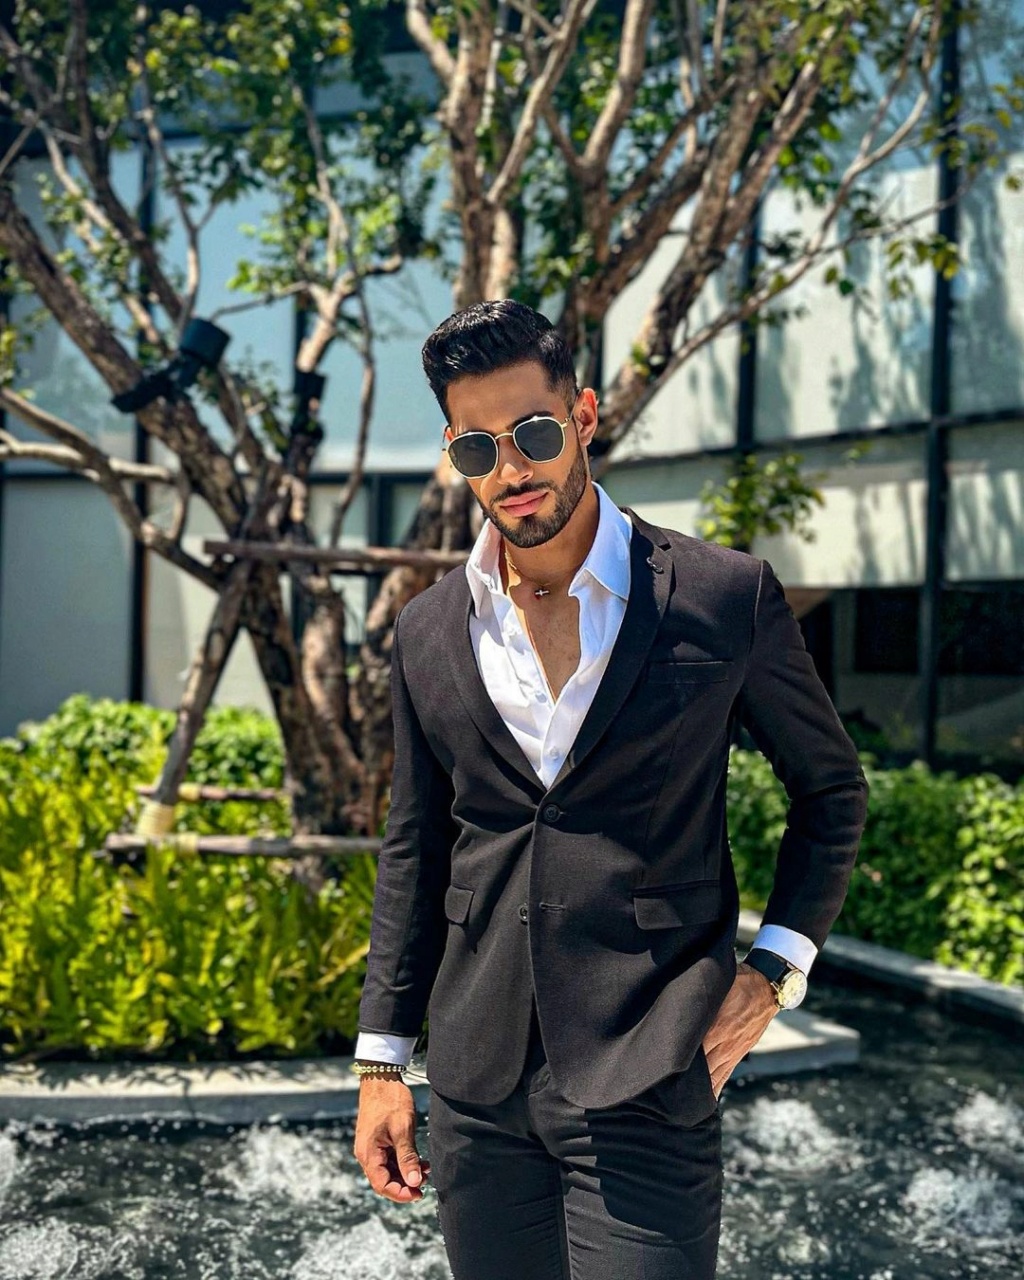 Manuel Franco - MISTER INTERNATIONAL 2022 - Official Thread (DOMINICAN REPUBLIC) Thai Version - Page 2 33244010